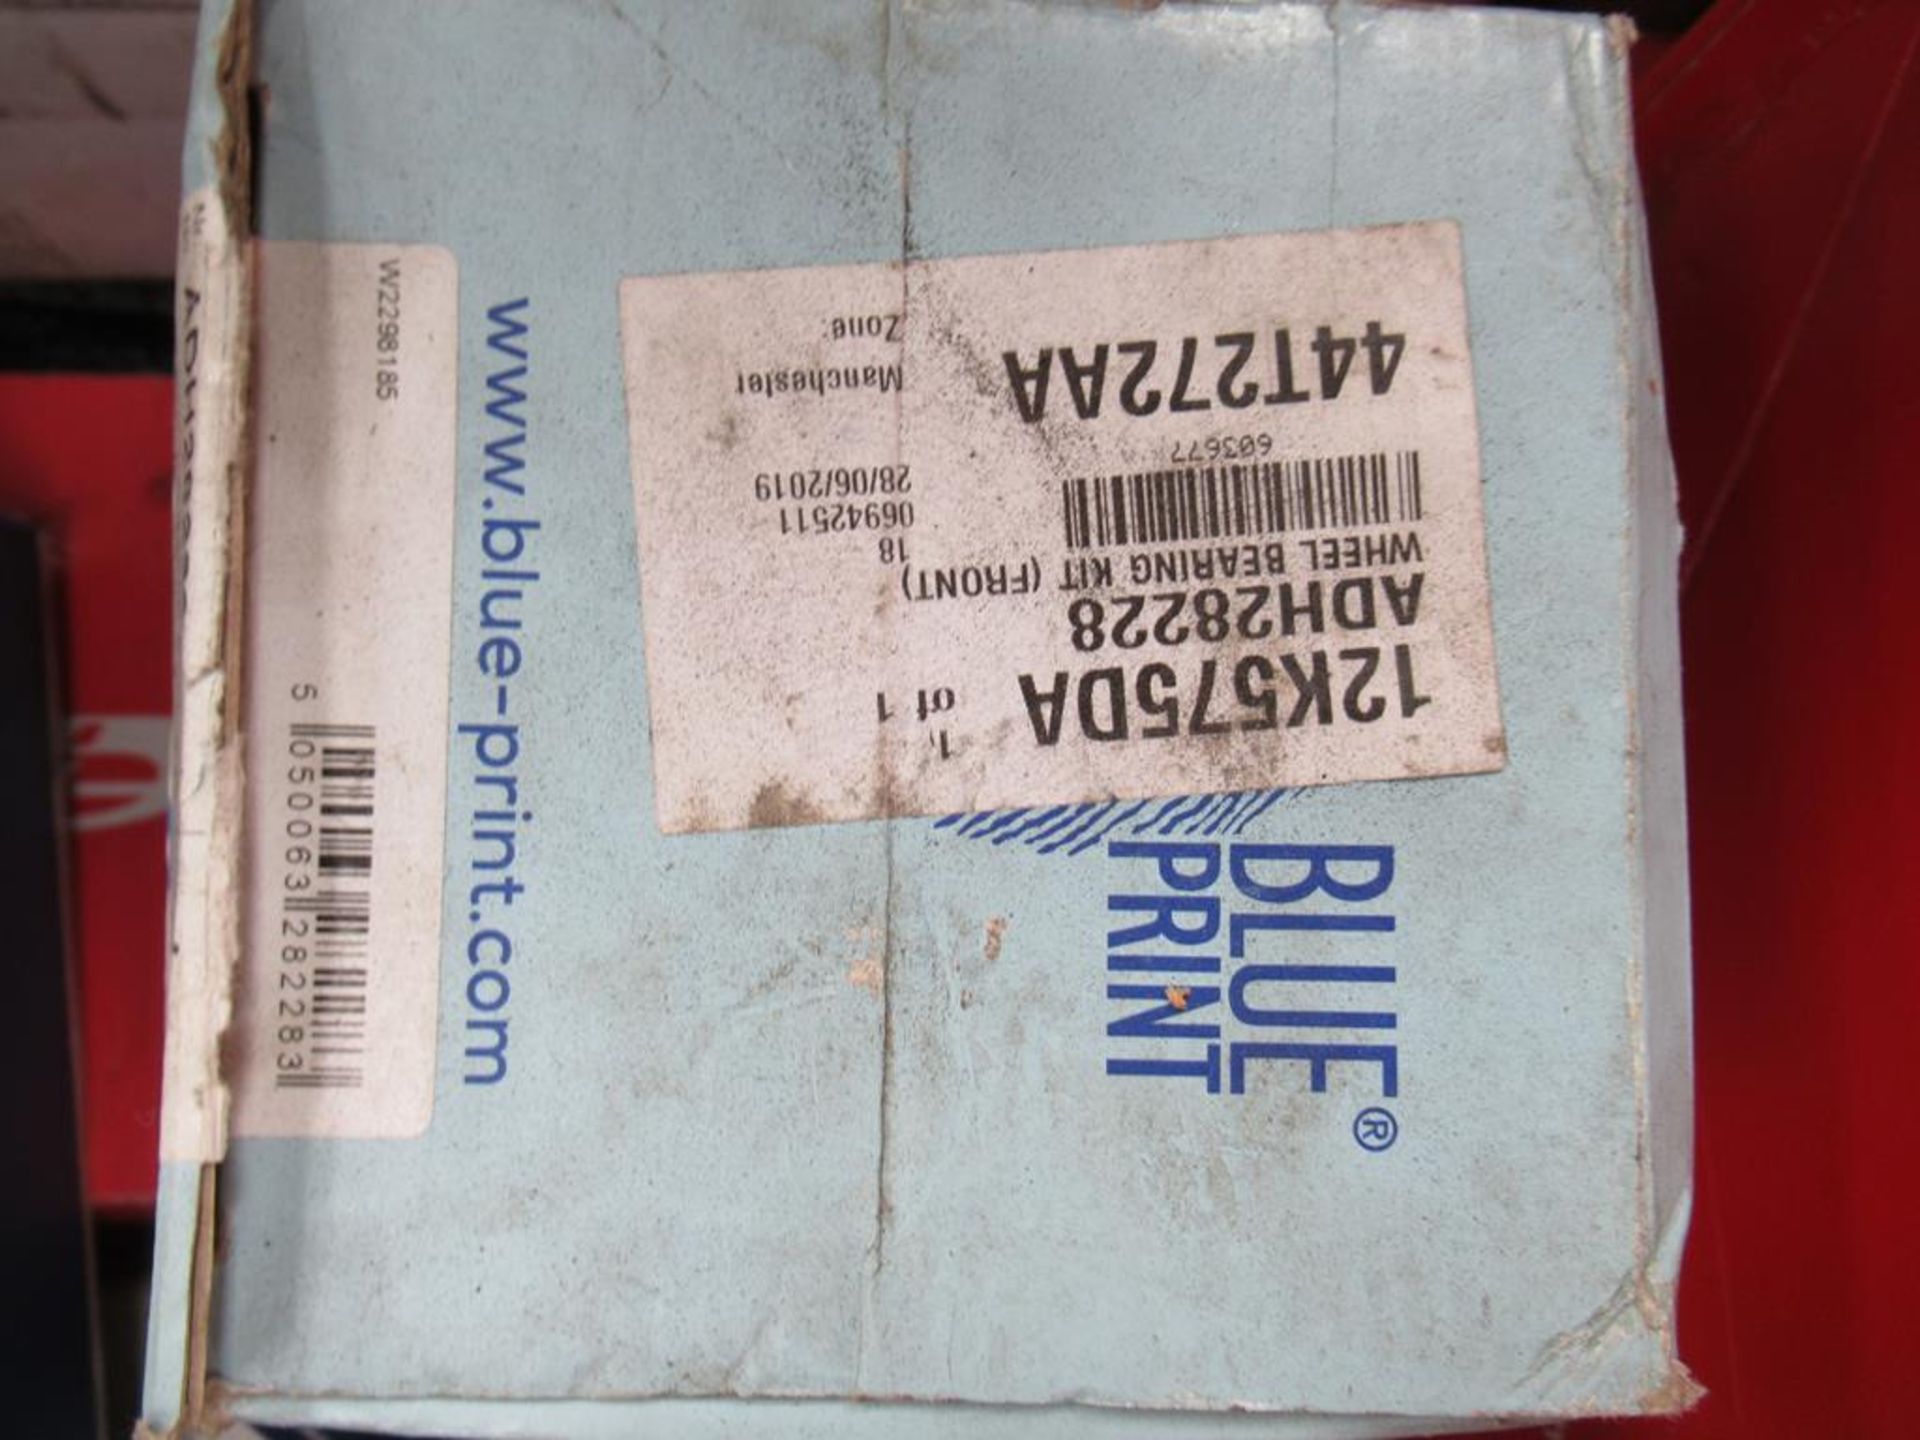 Pallet of Assorted Automotive Vehicle Parts - Mostly for Honda Civic - including bushes, oil filters - Image 6 of 6